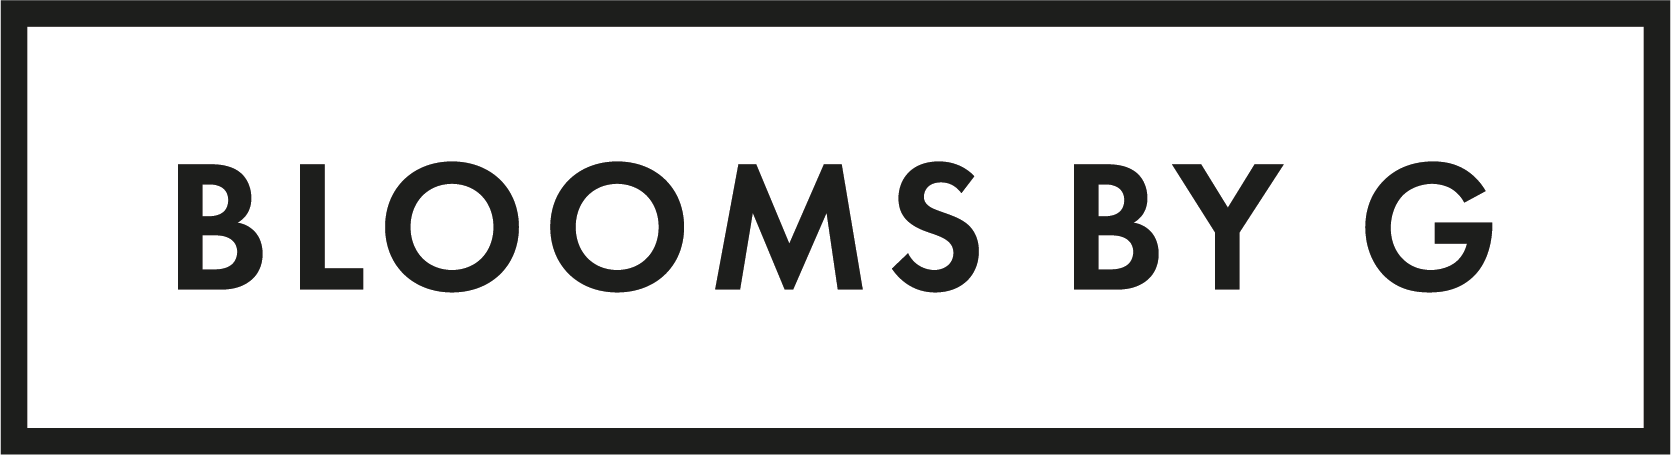 Blooms By G Logo